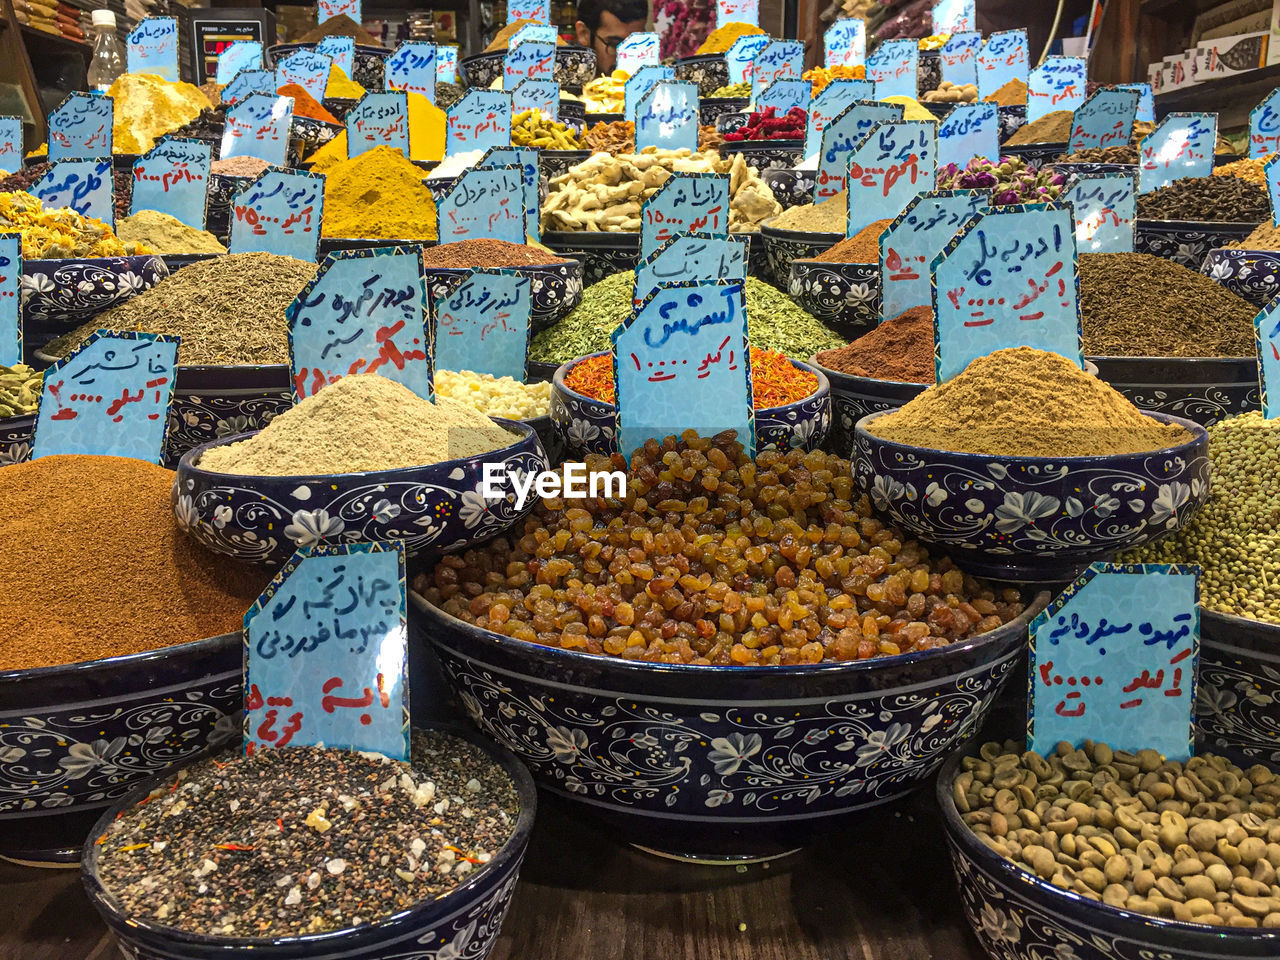 The wide variety of spices, herbs, and dried berries in a stall of vakil bazaar, shiraz, iran